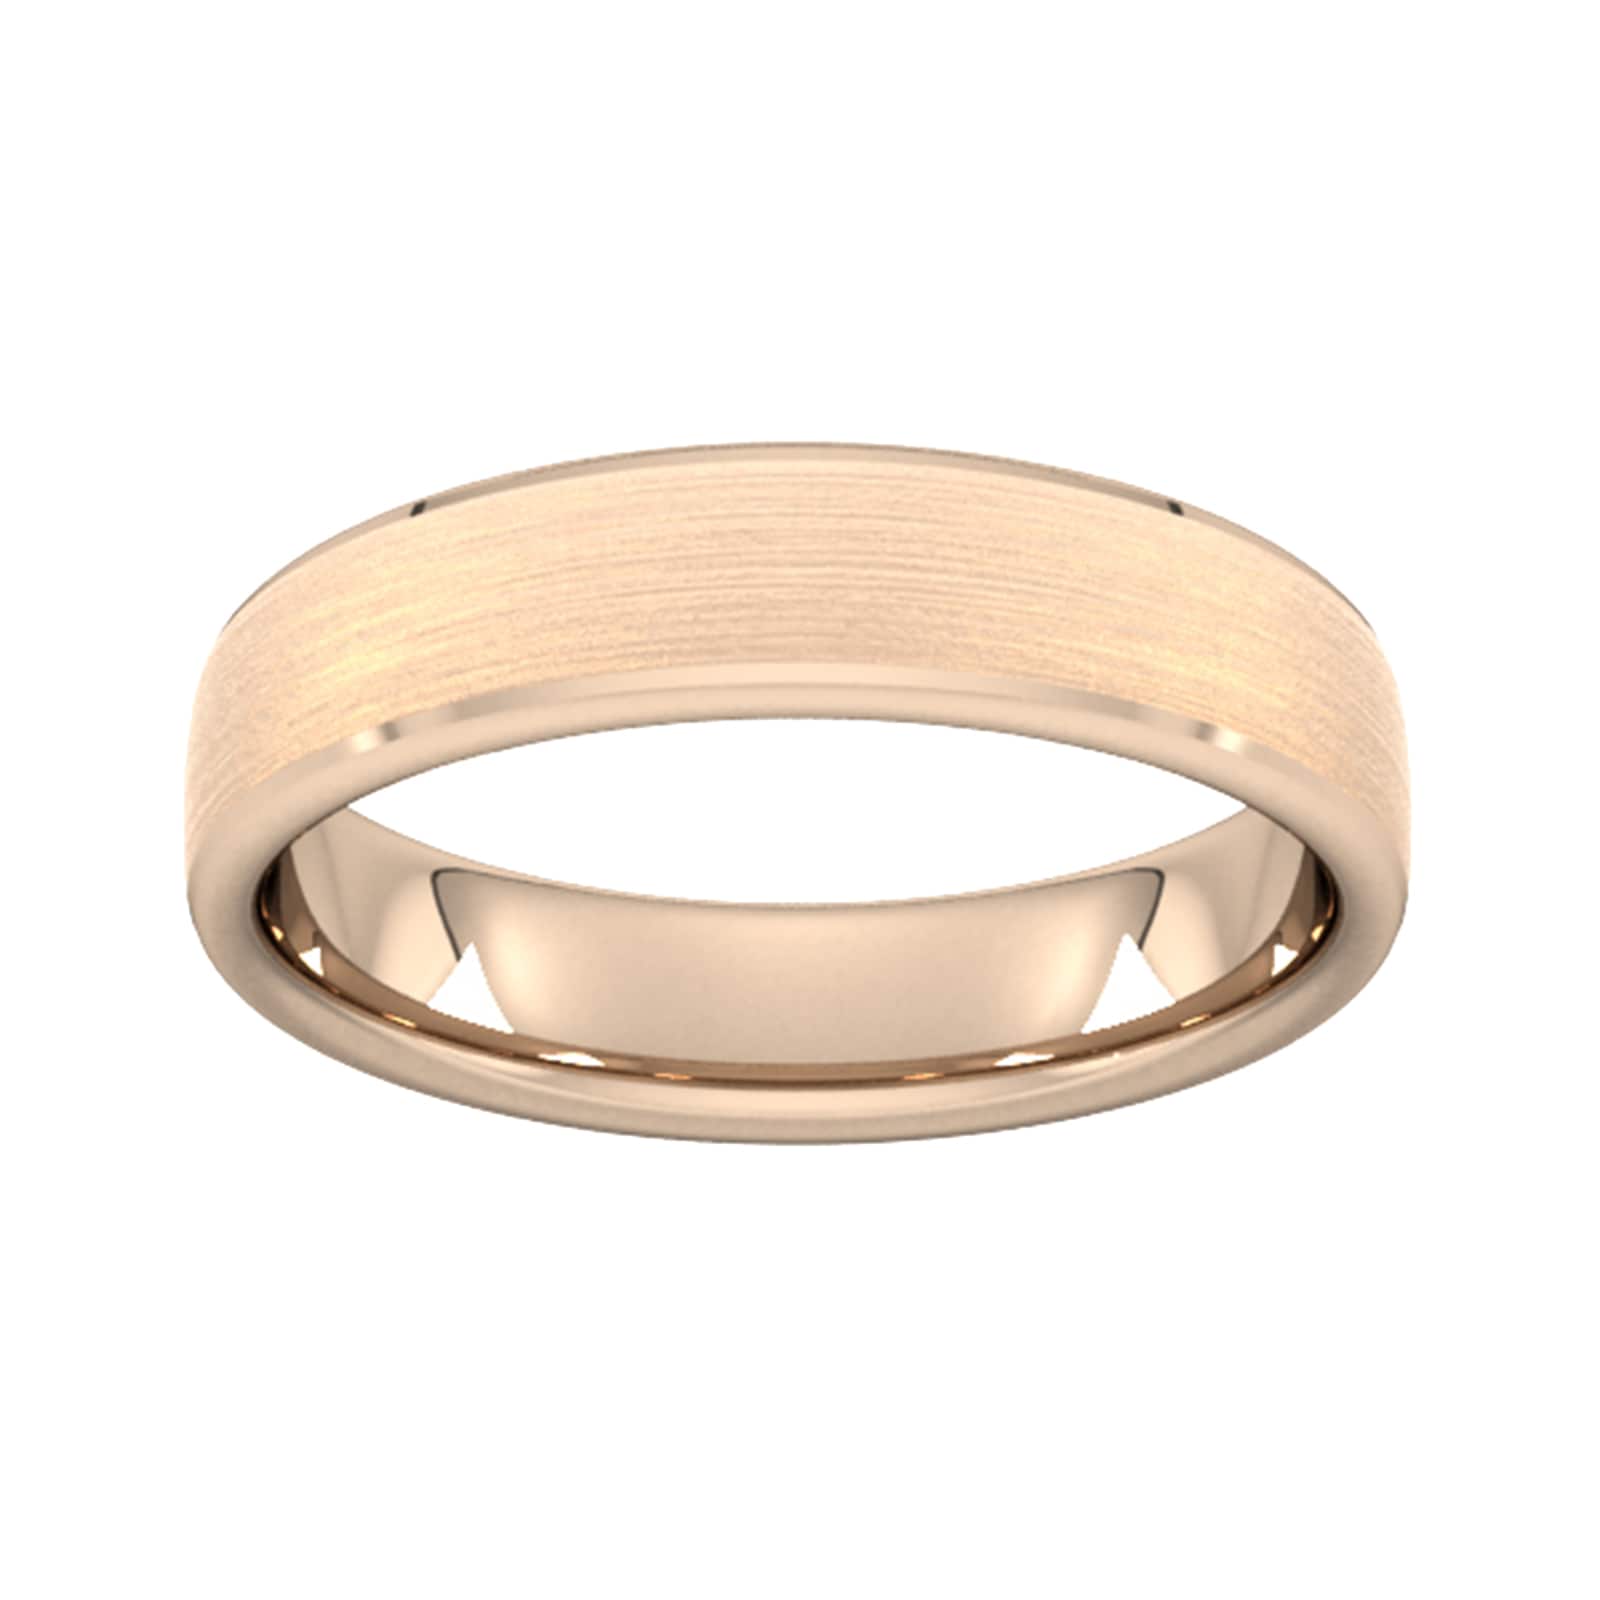 5mm Flat Court Heavy Polished Chamfered Edges With Matt Centre Wedding Ring In 18 Carat Rose Gold - Ring Size V